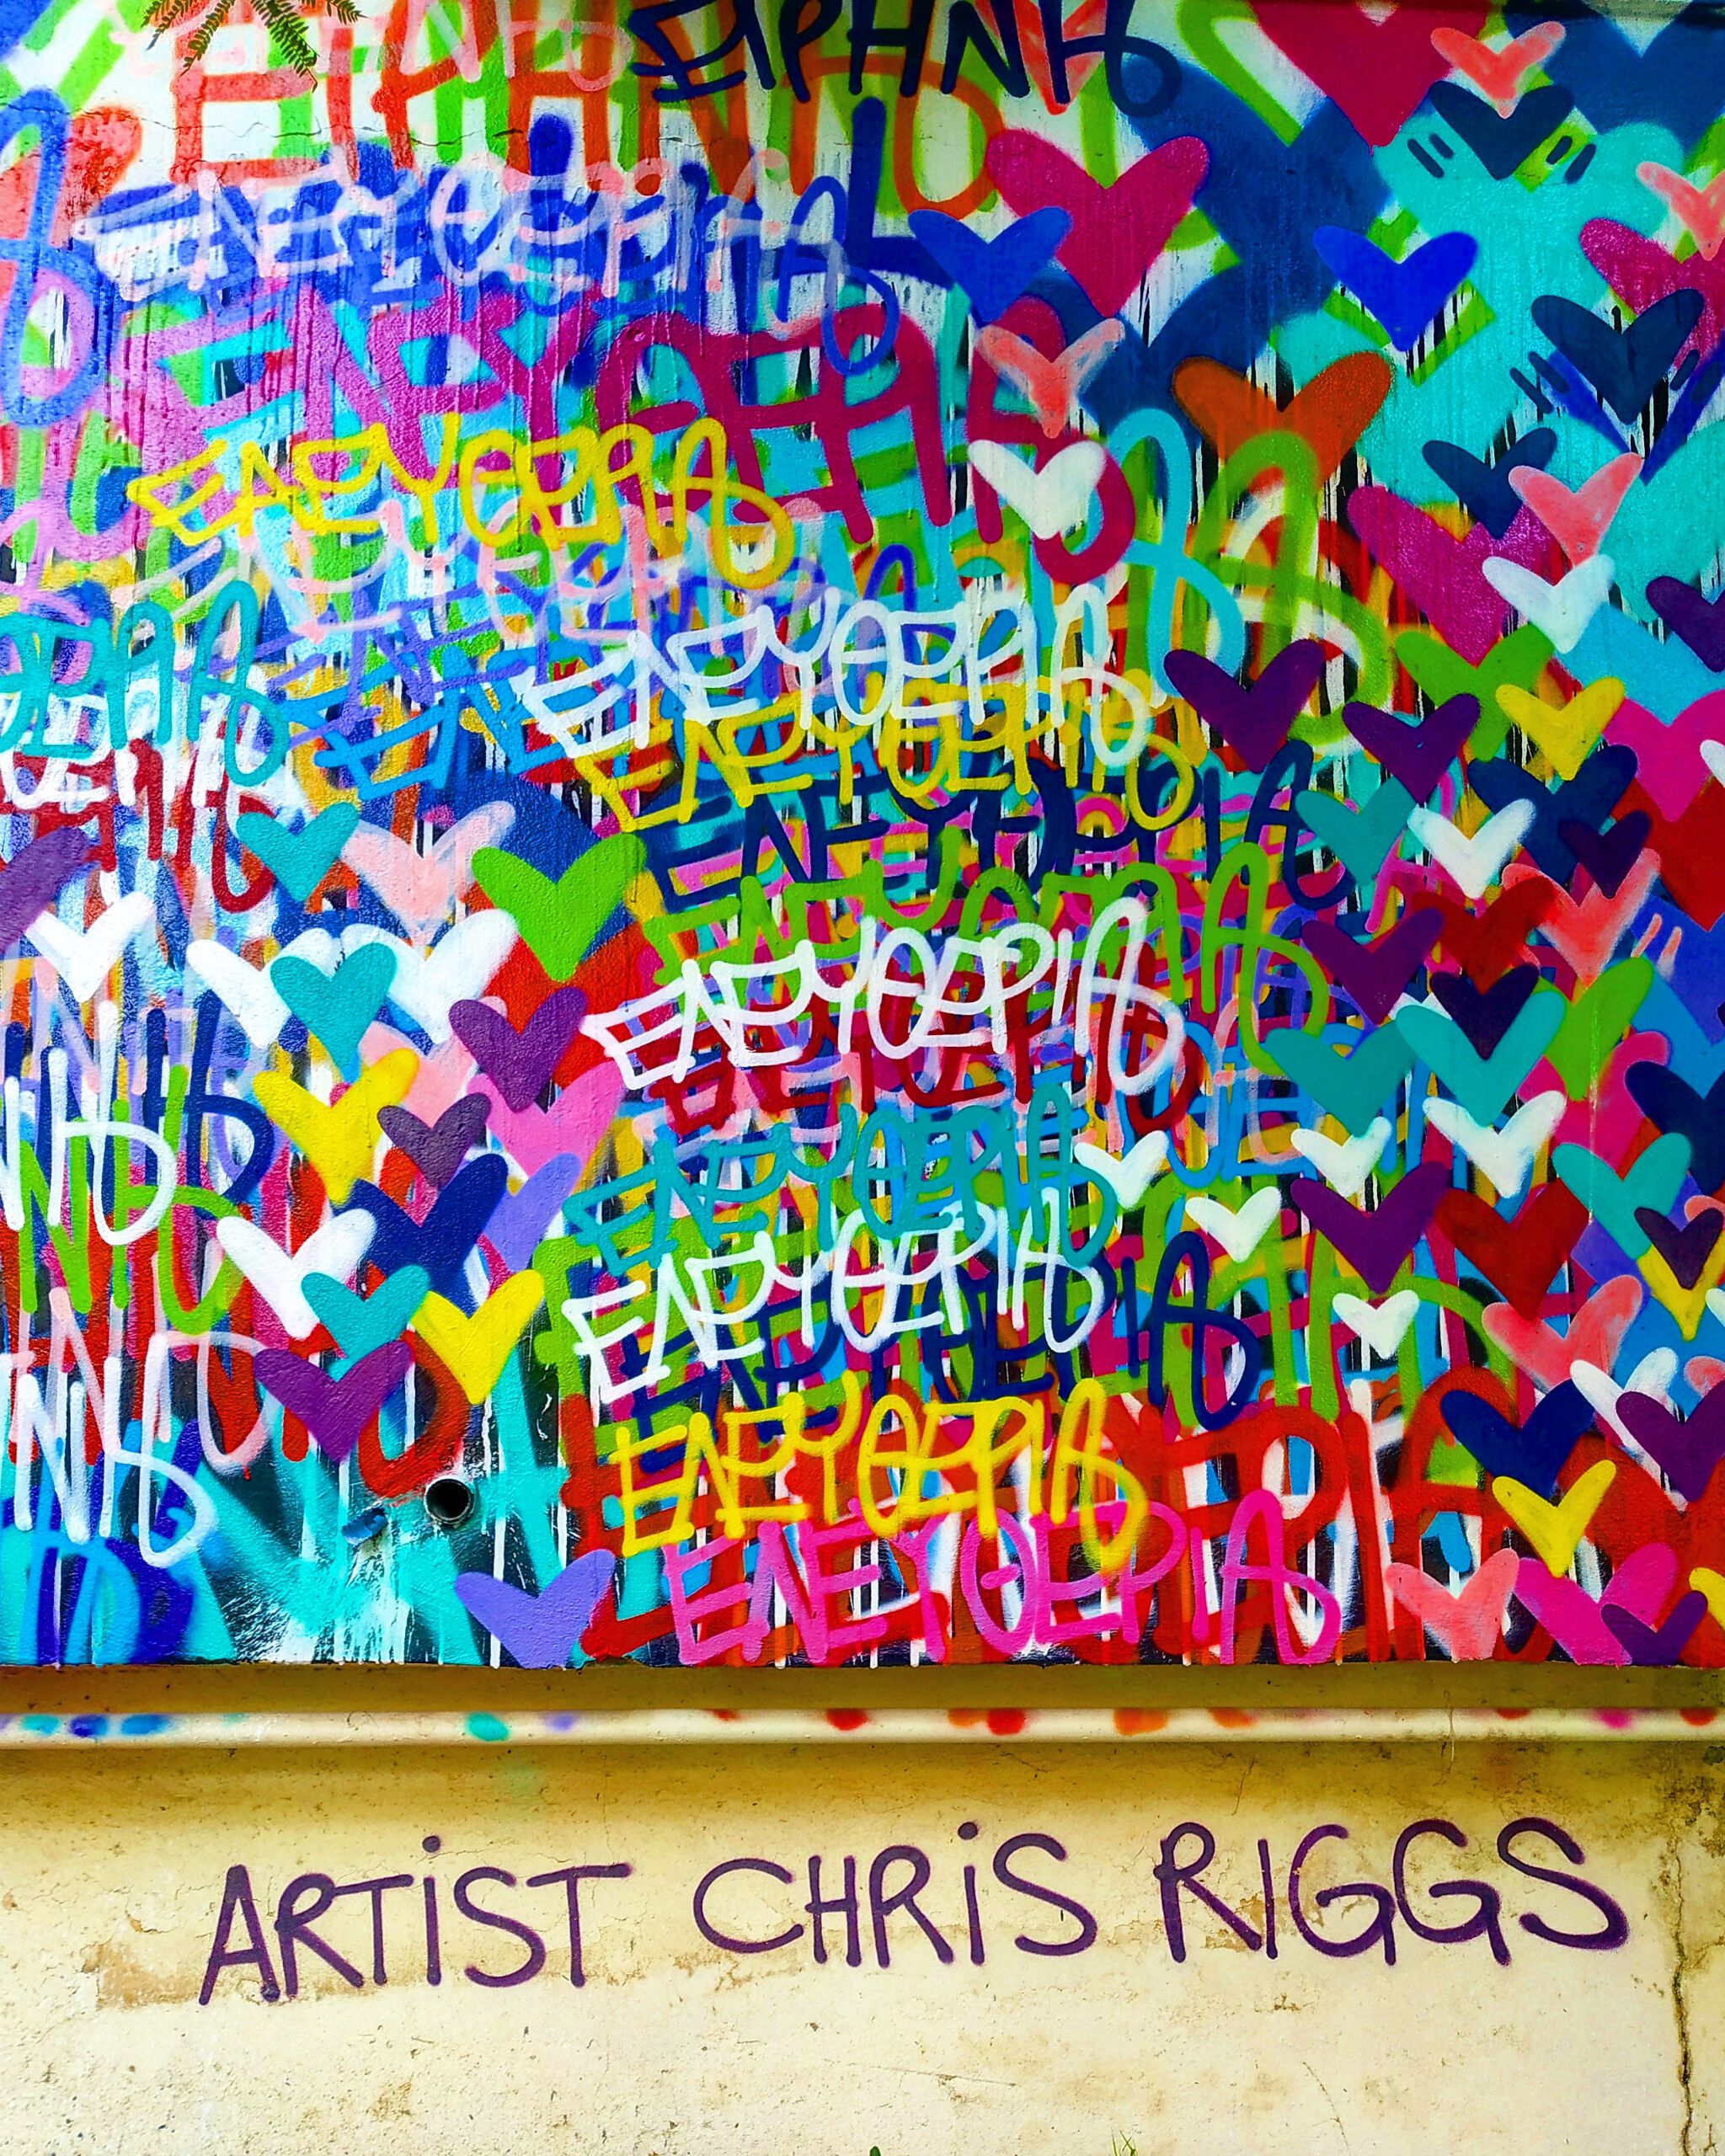 Chris Riggs&mdash;Peace, love and freedom